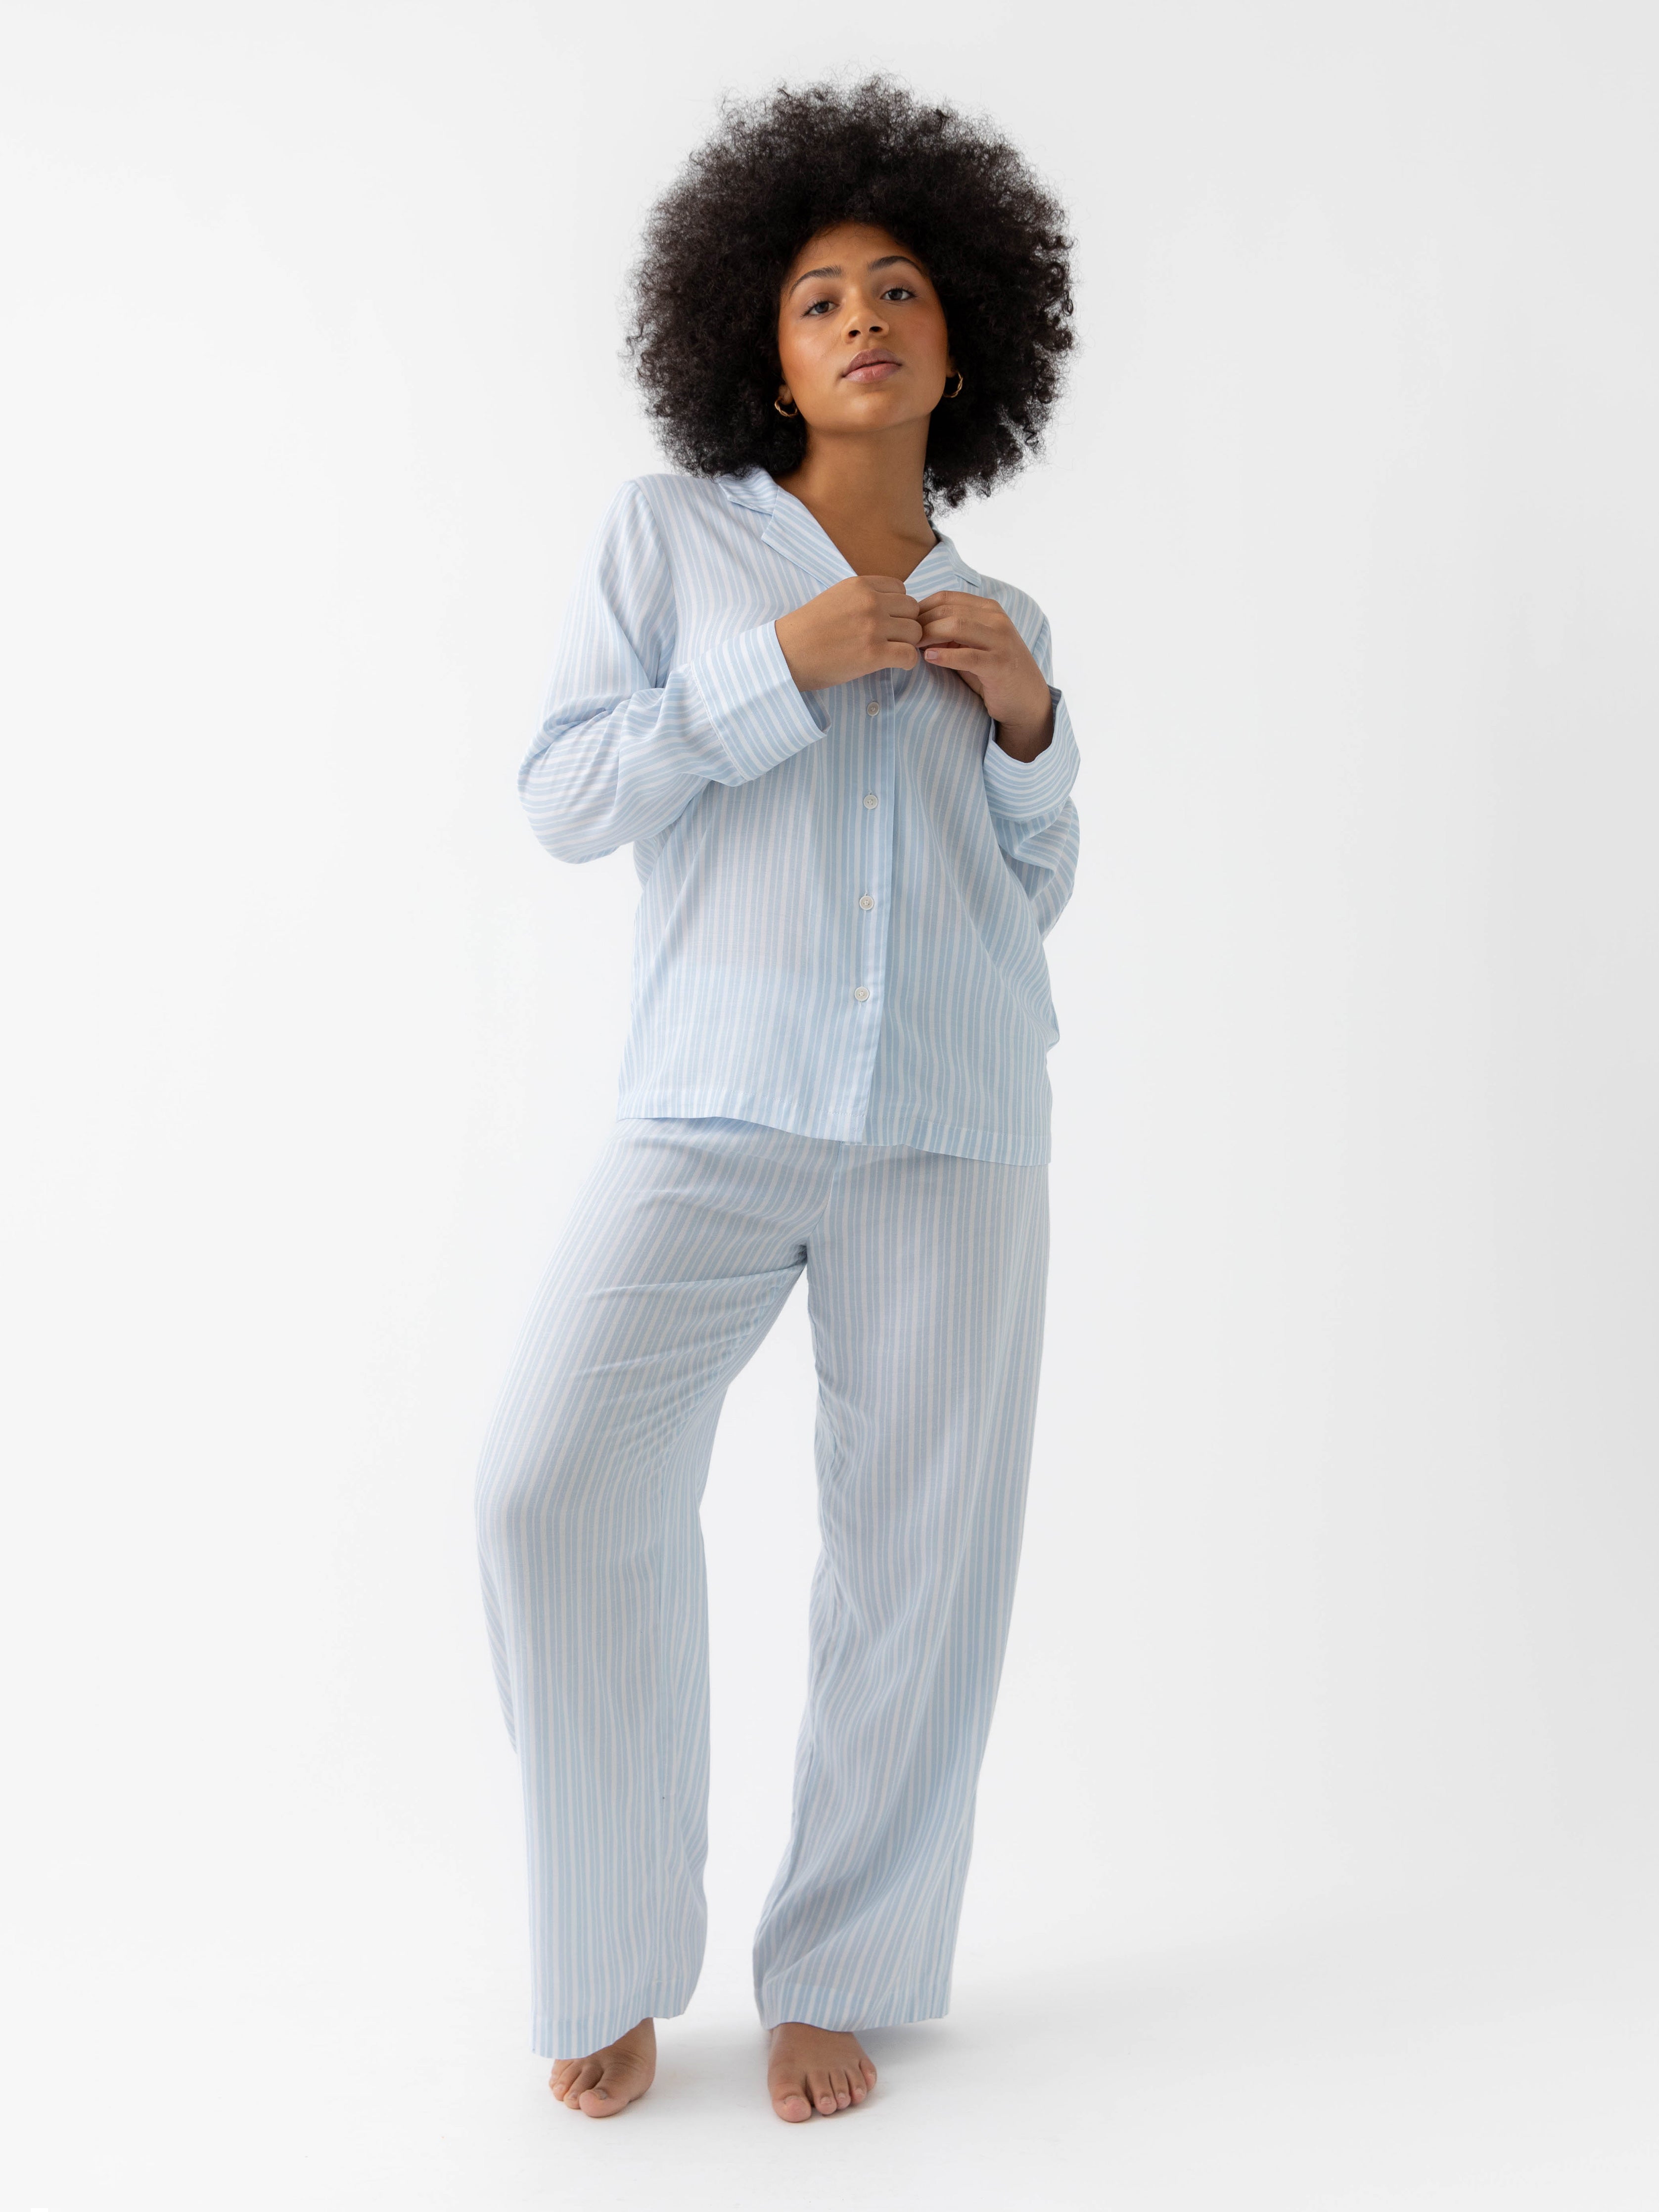 Woman in spring blue stripe soft woven pajama set with white background |Color:Spring Blue Stripe